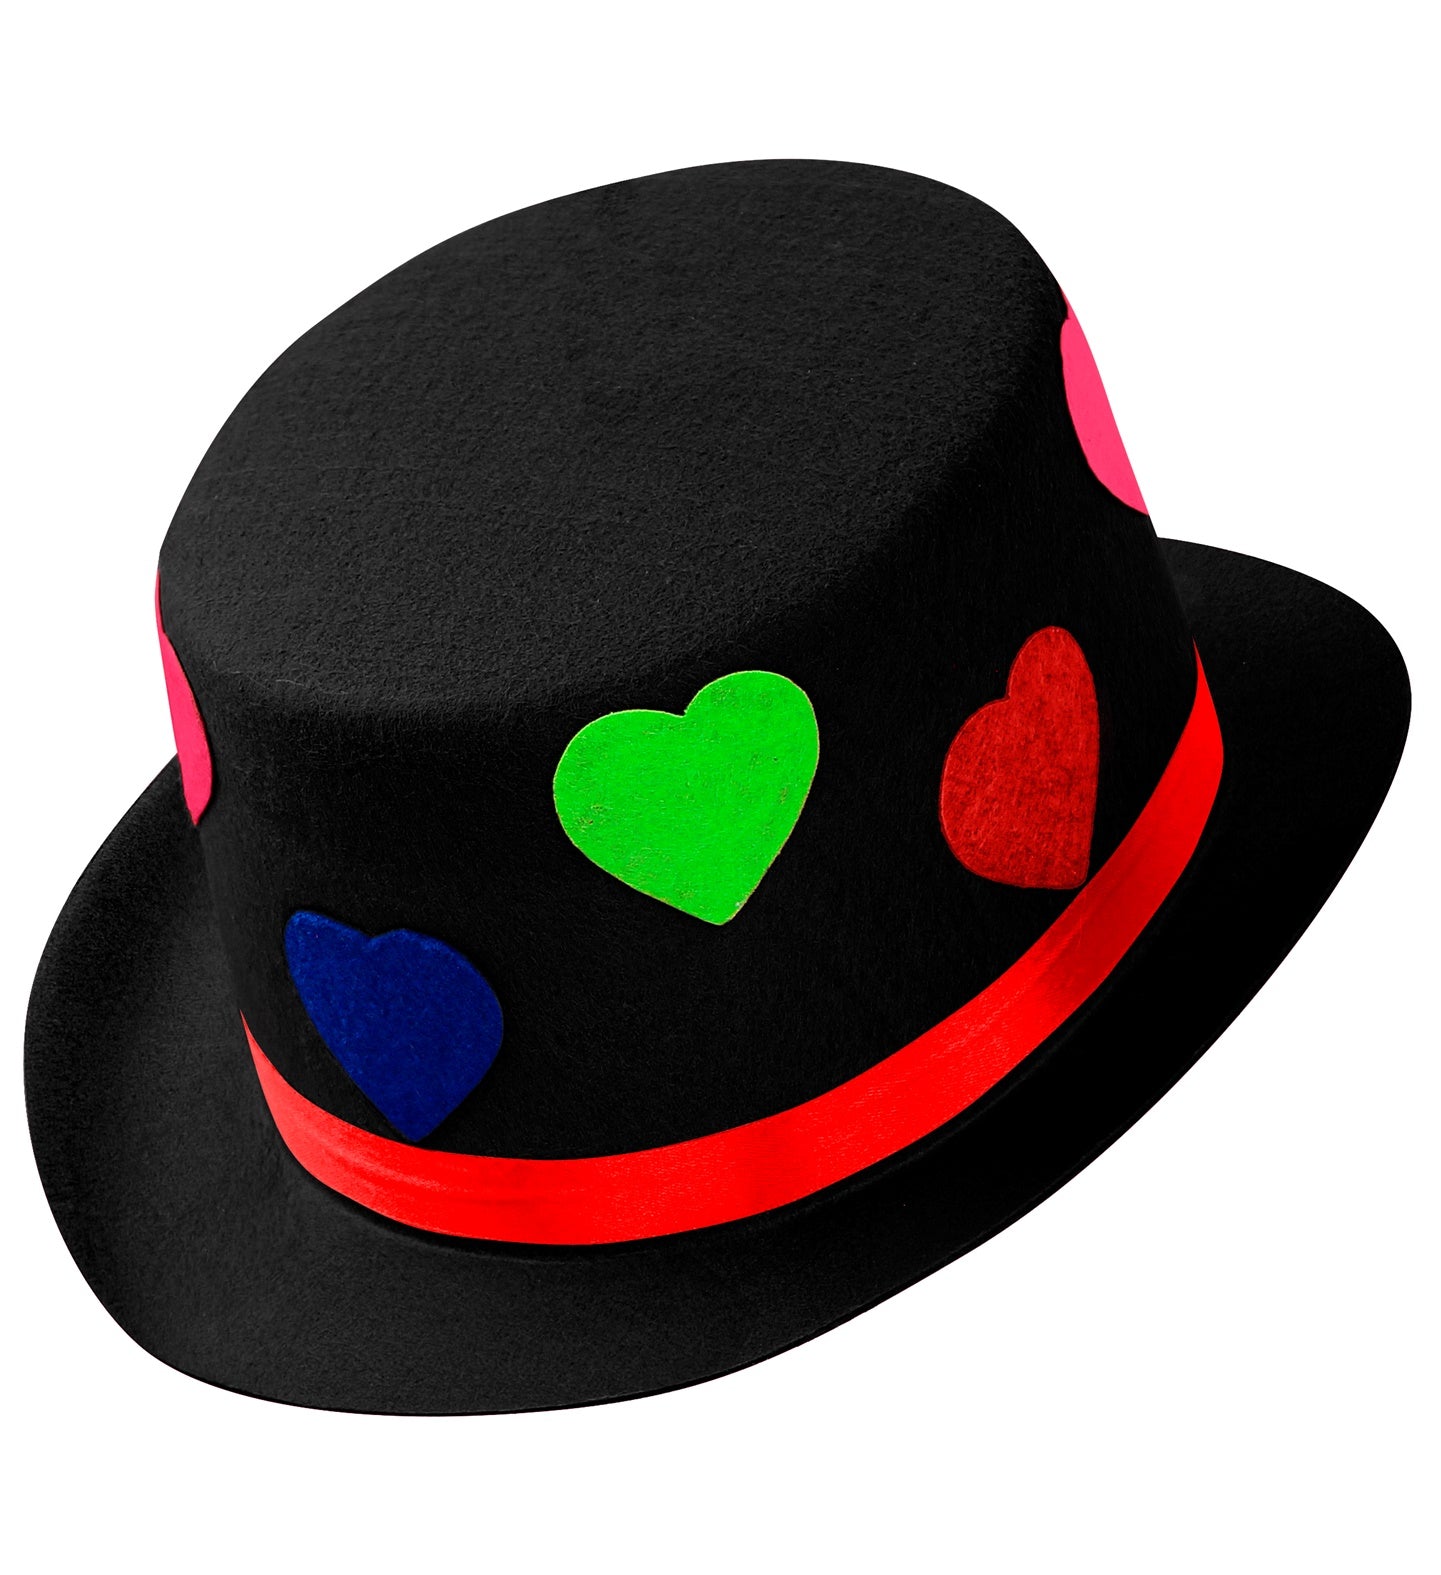 Felt Top Hat With Hearts